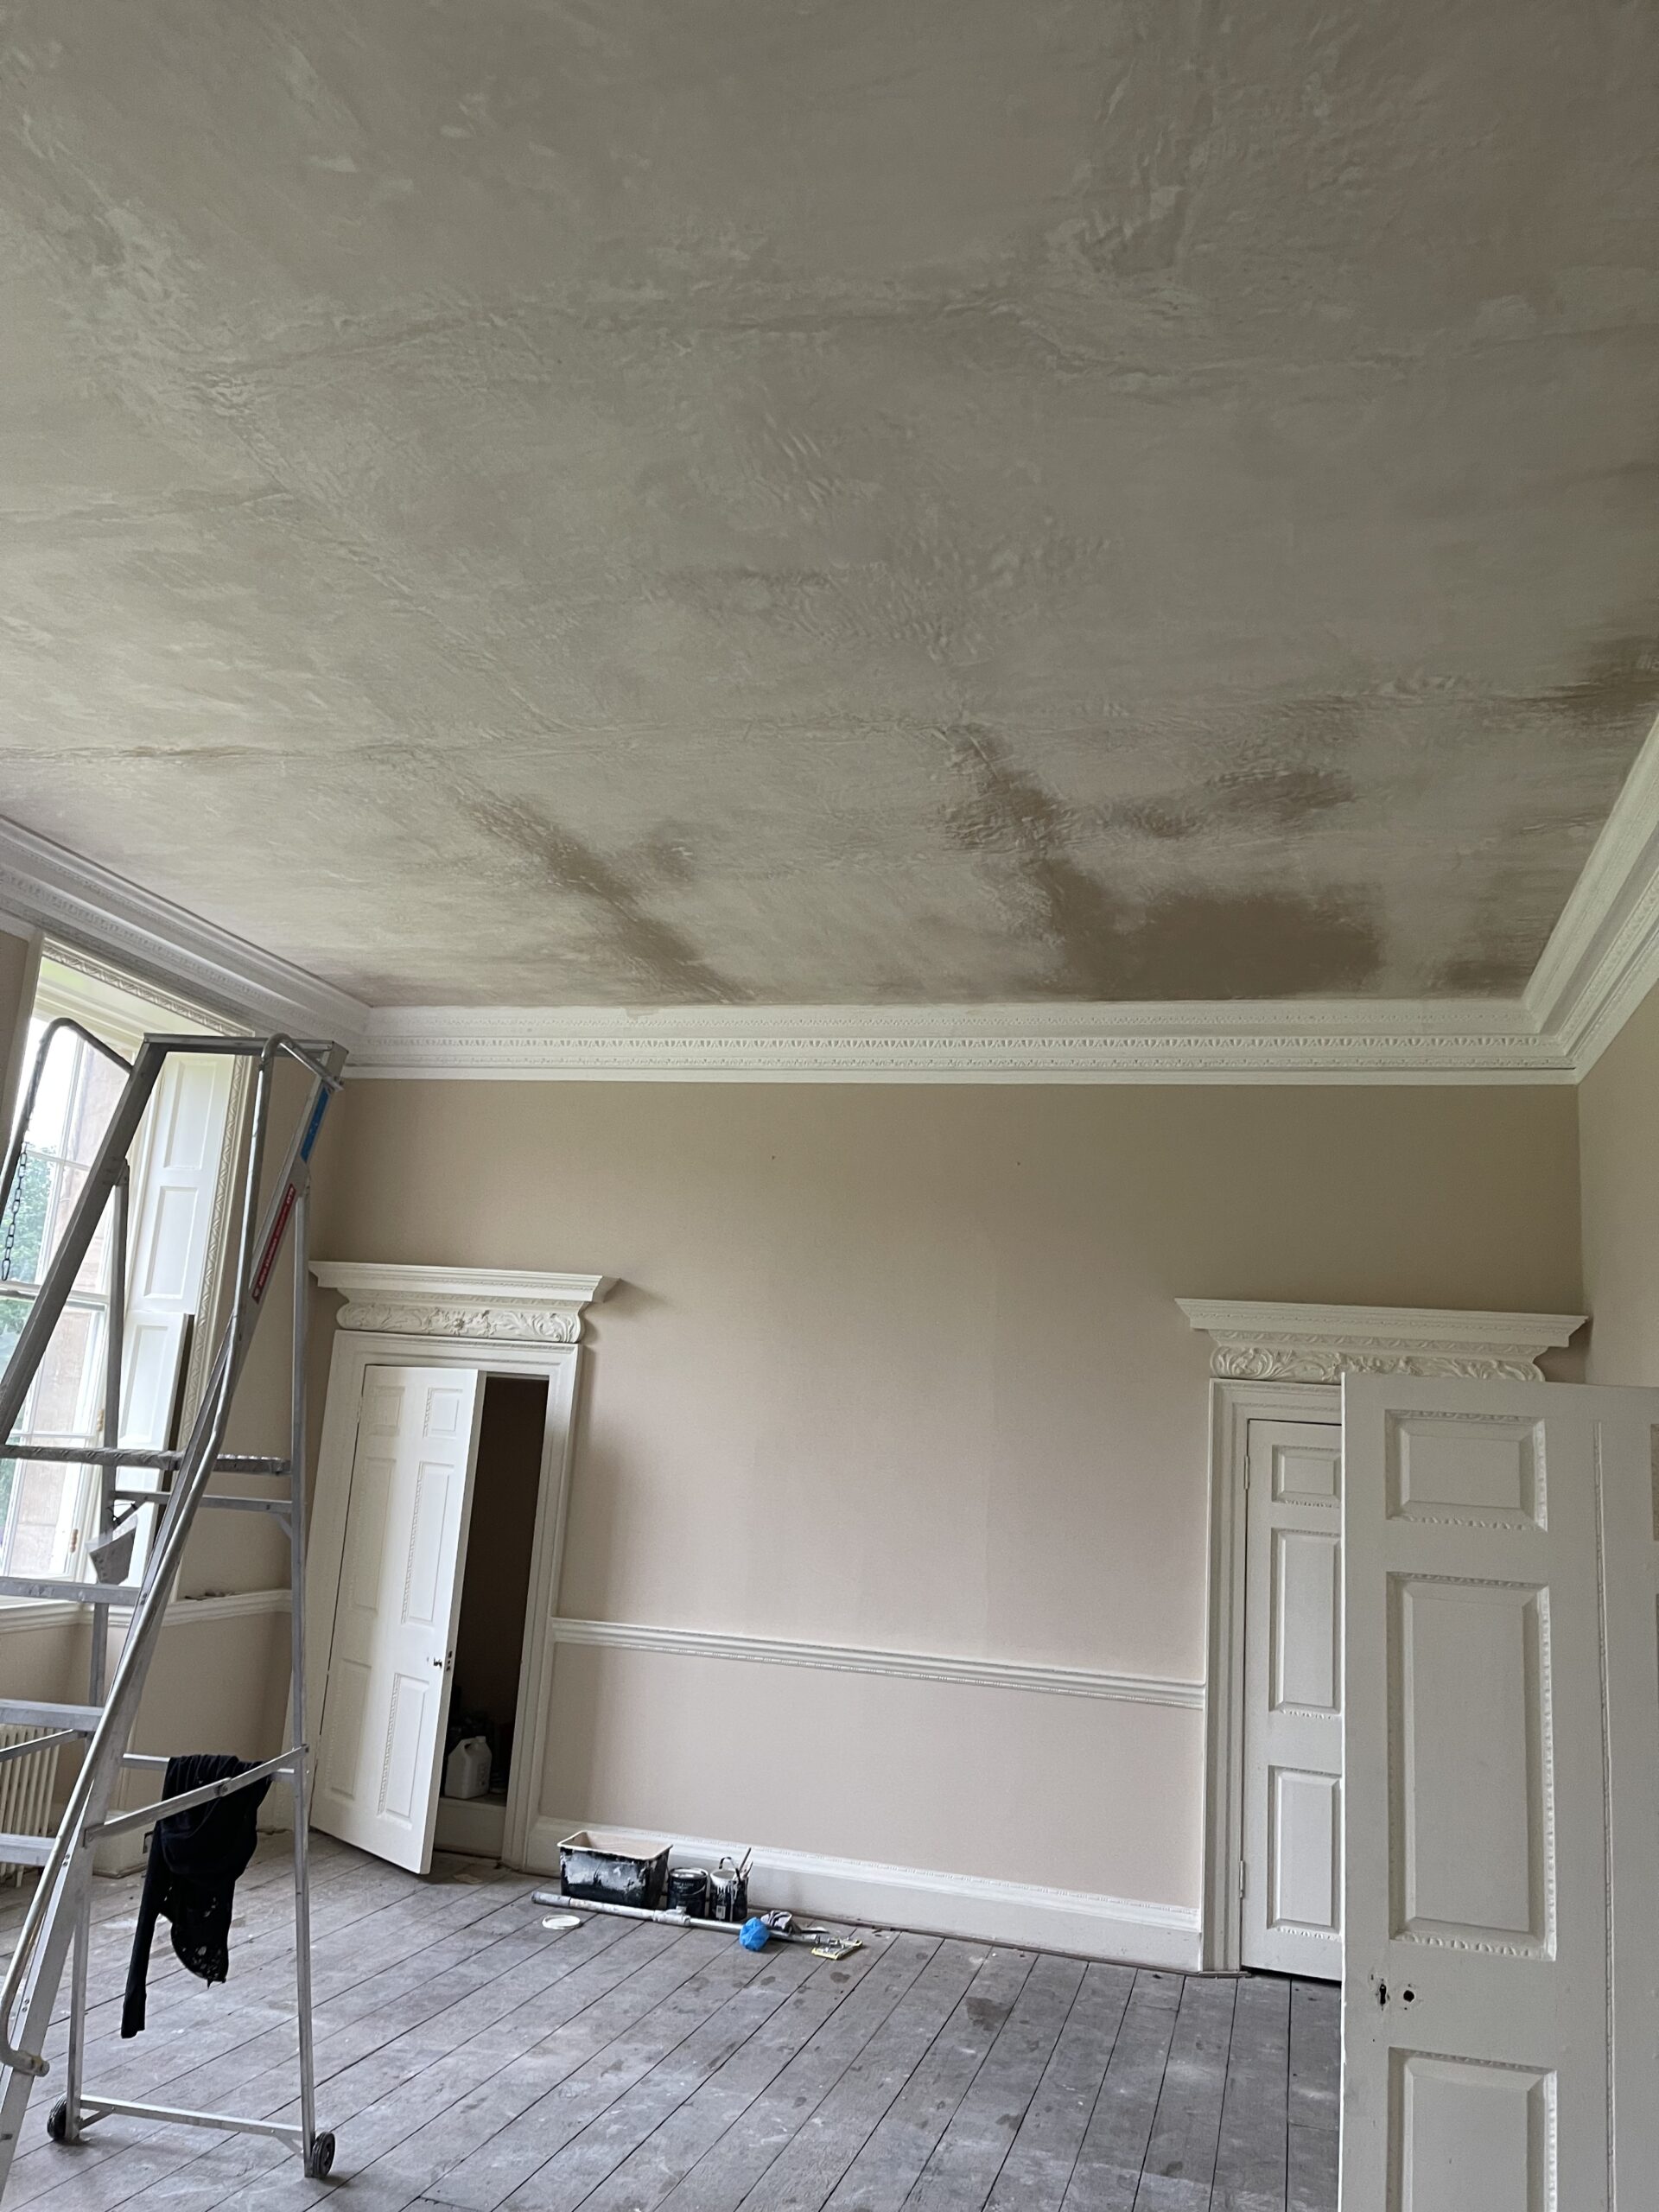 Lime plaster to walls and ceiling